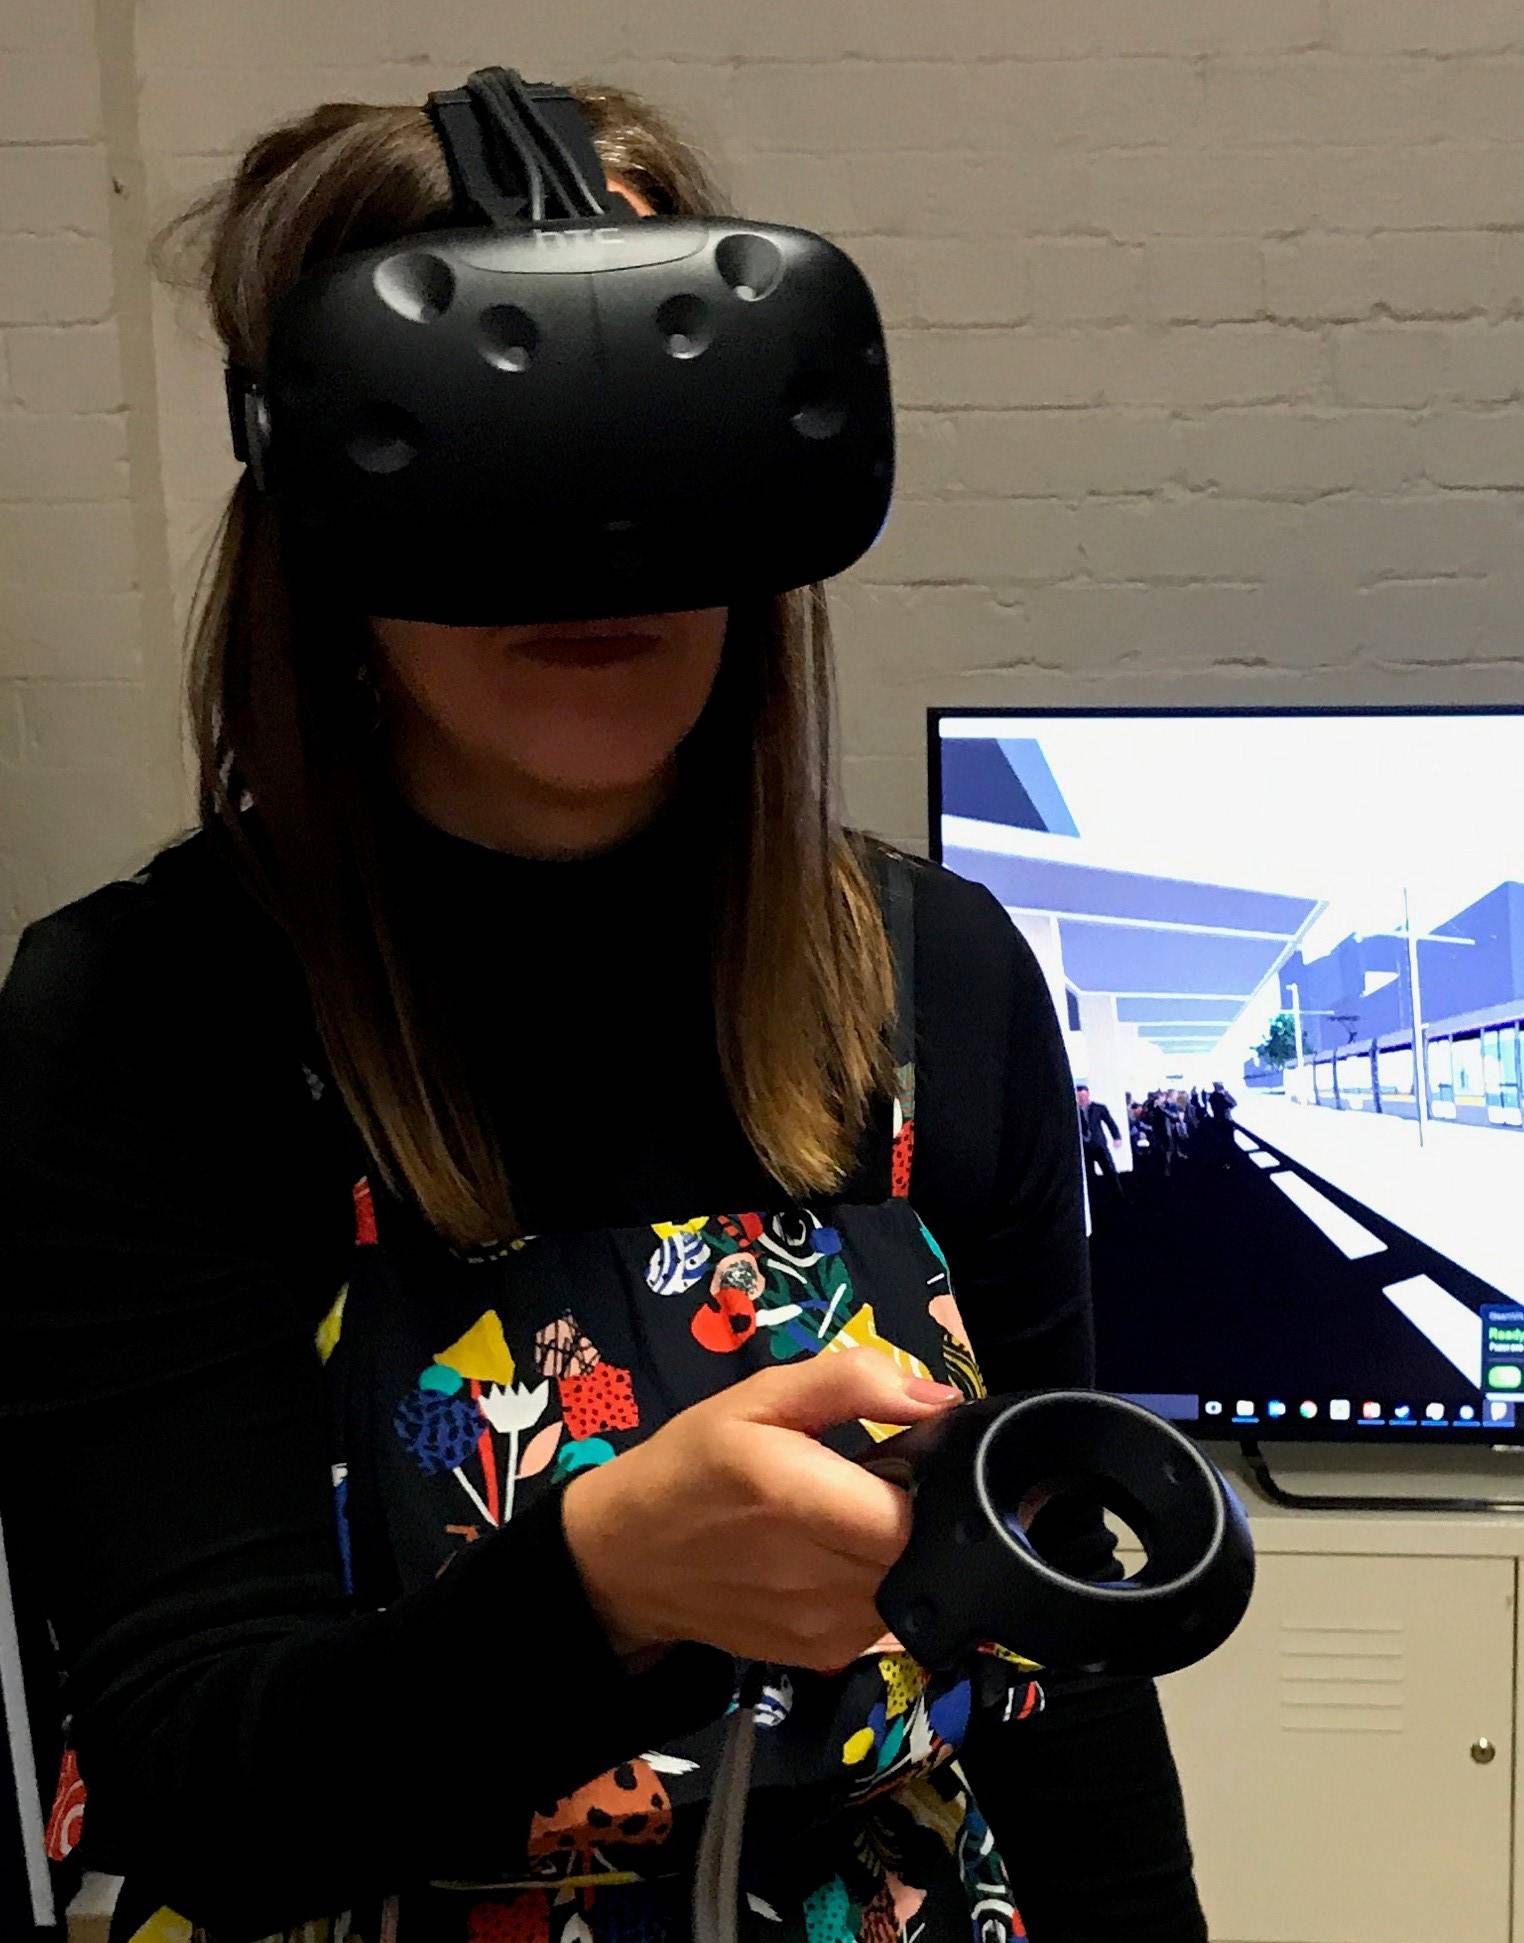 Using virtual reality to enable a sensory design experience